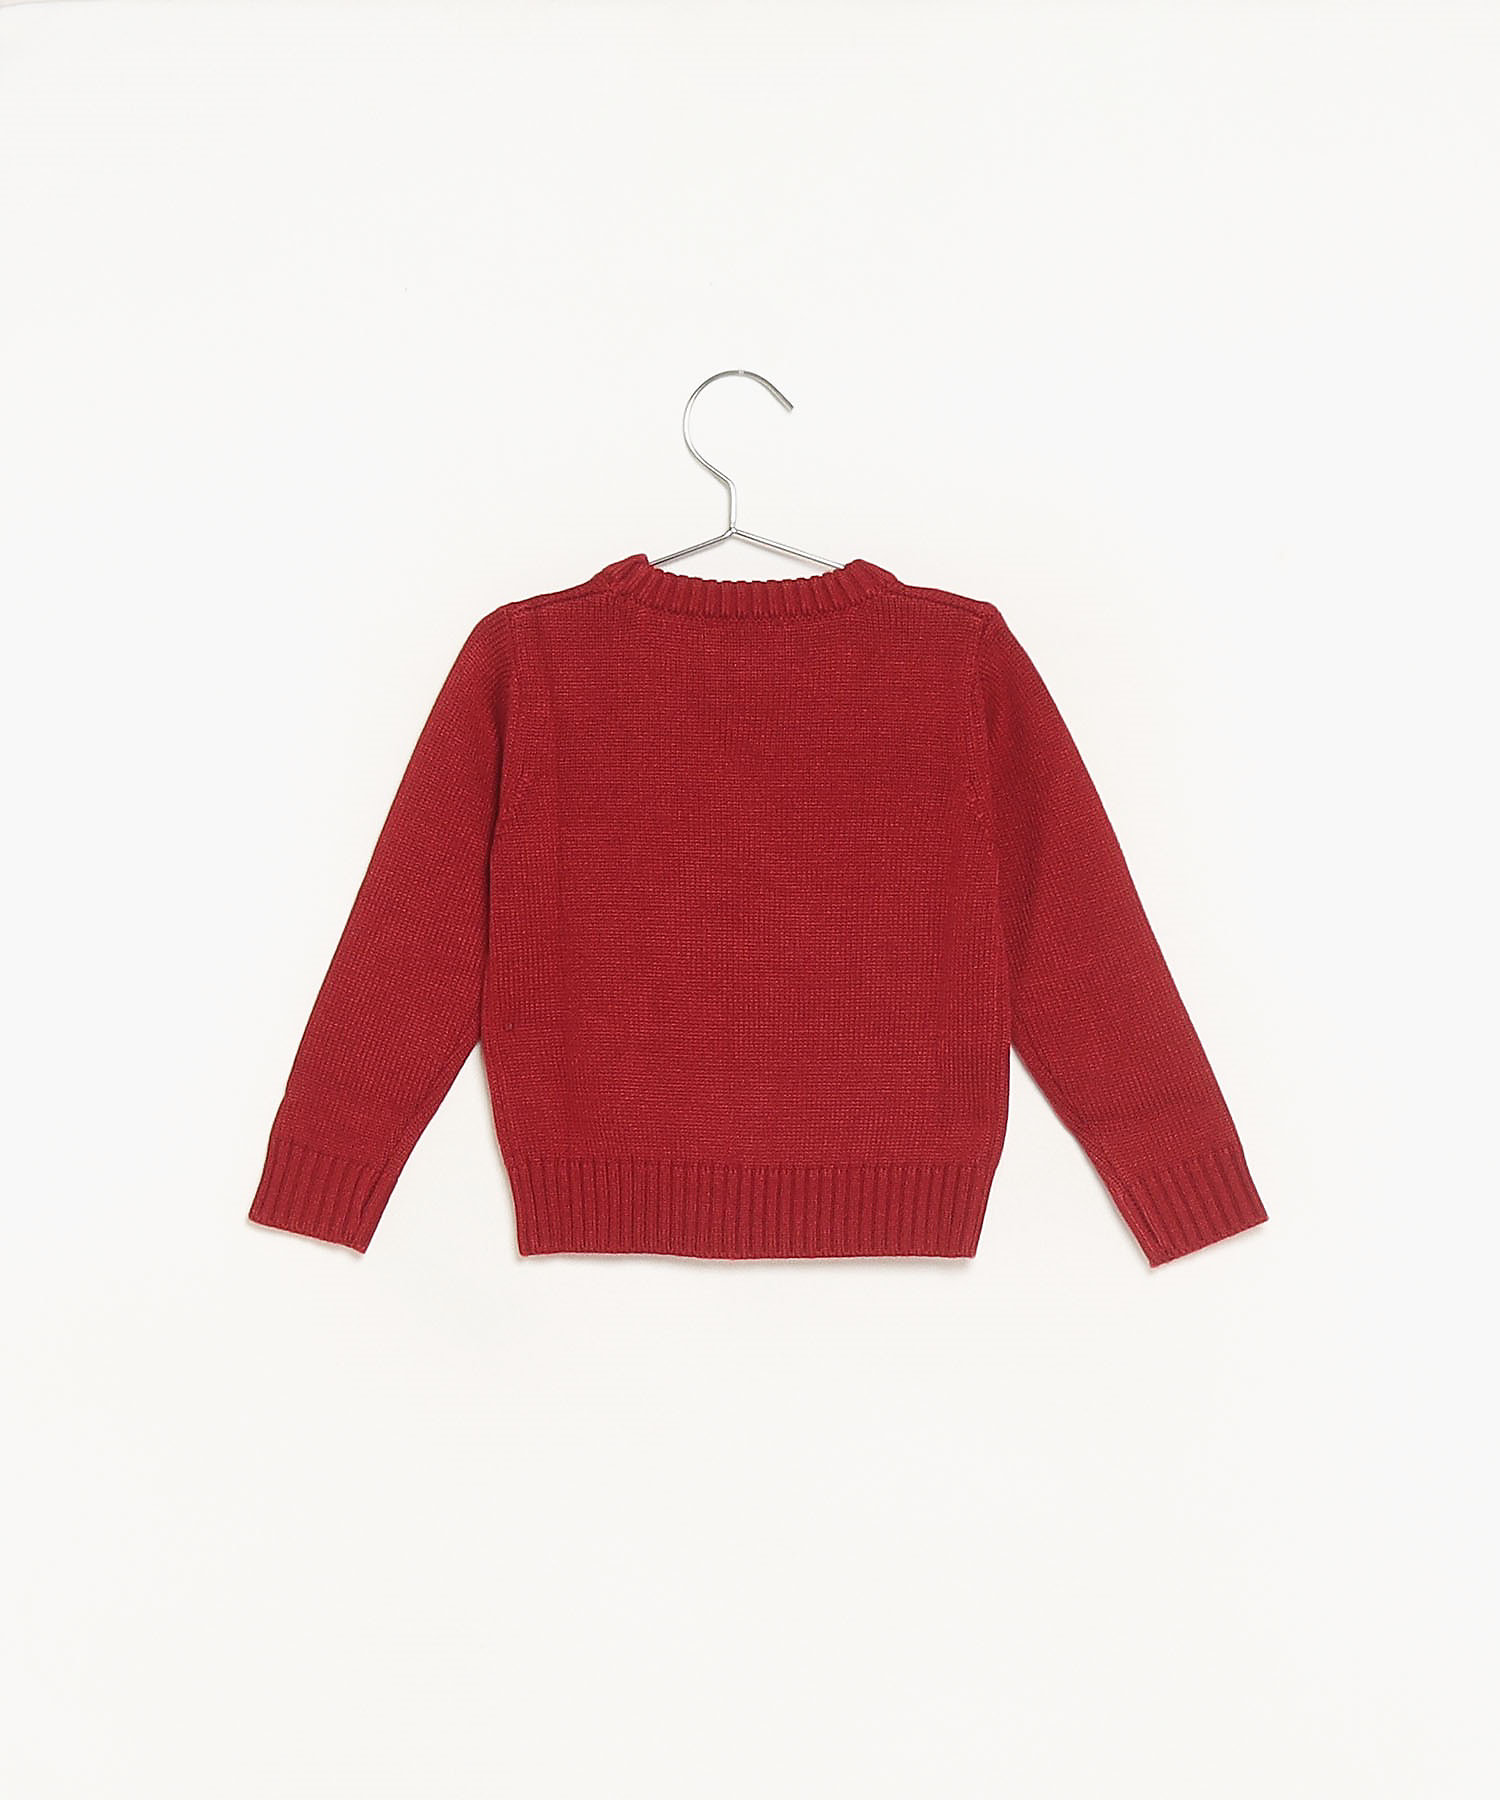 ＬＹ５４ Ｅ ＰＵＬＬＯＶＥＲ キッズ プルオーバー